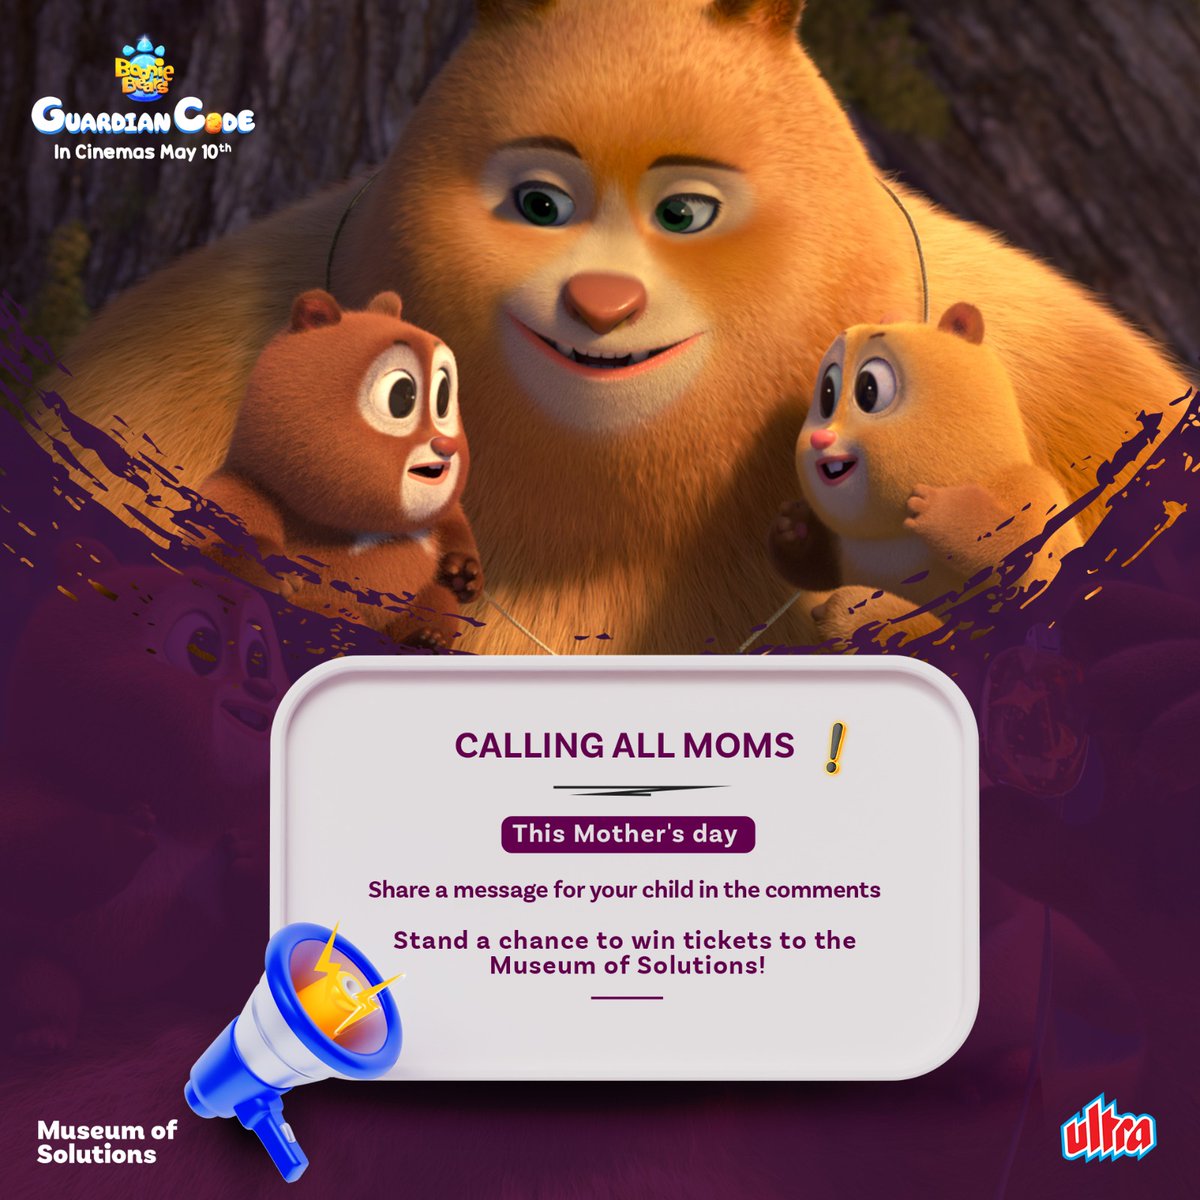 Stand a chance to win a ticket to the Museum of Solutions (MuSo) for your children. Just drop a heartfelt message for them in the comments. We'll pin the most heartfelt ones! Watch #BoonieBears on May 10th, a Mother's Day special Releasing in English & Hindi #MothersDay #NewMovie